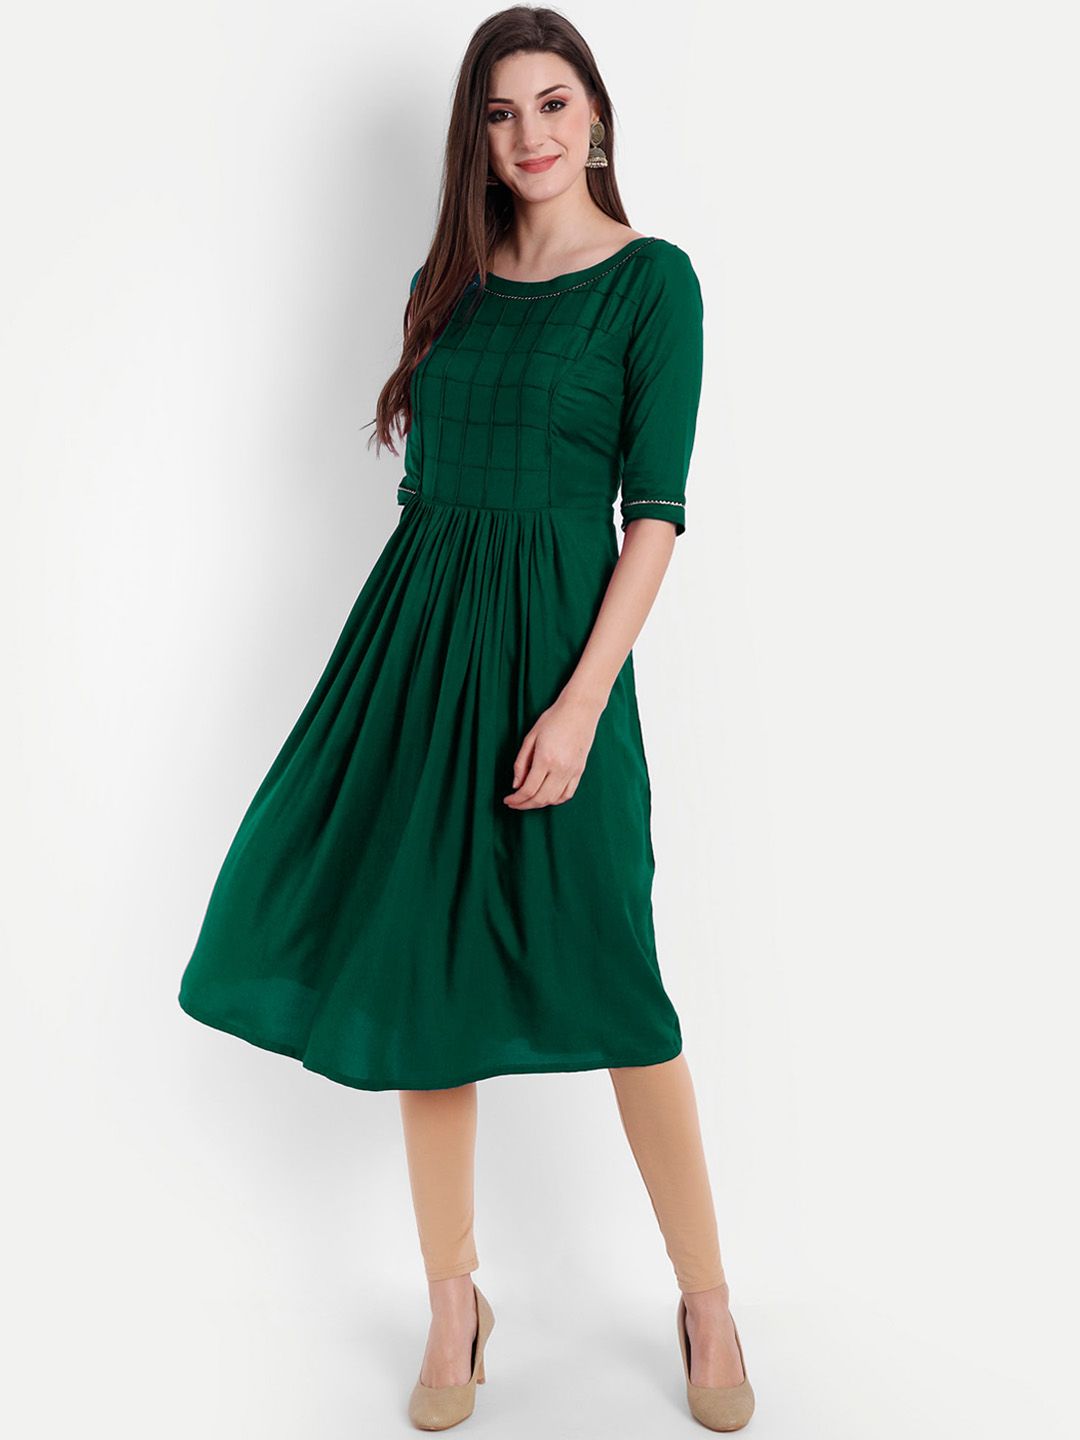 Globon Impex Green Pin-Tuck Ethnic Fit & Flare Dress Price in India